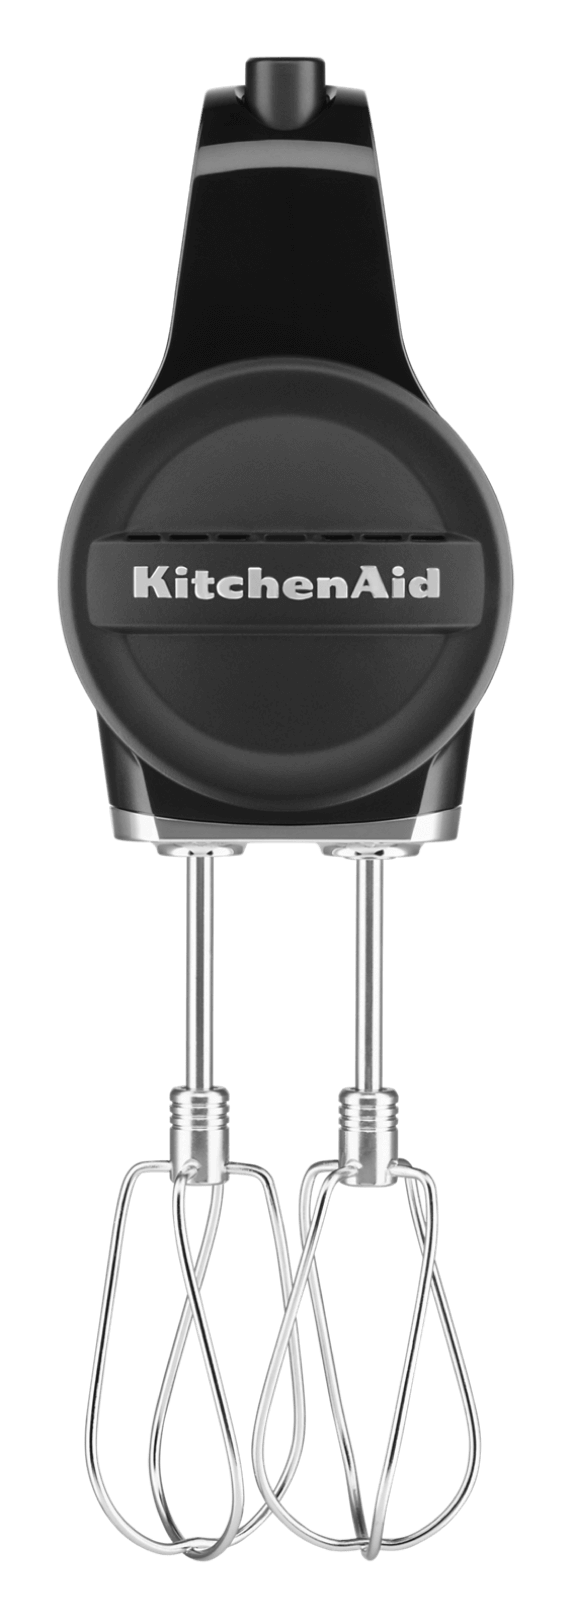 KitchenAid Cordless 7-Speed Hand Mixer: Taking the Traditional Appliance  Into the Modern Age - ReadWrite